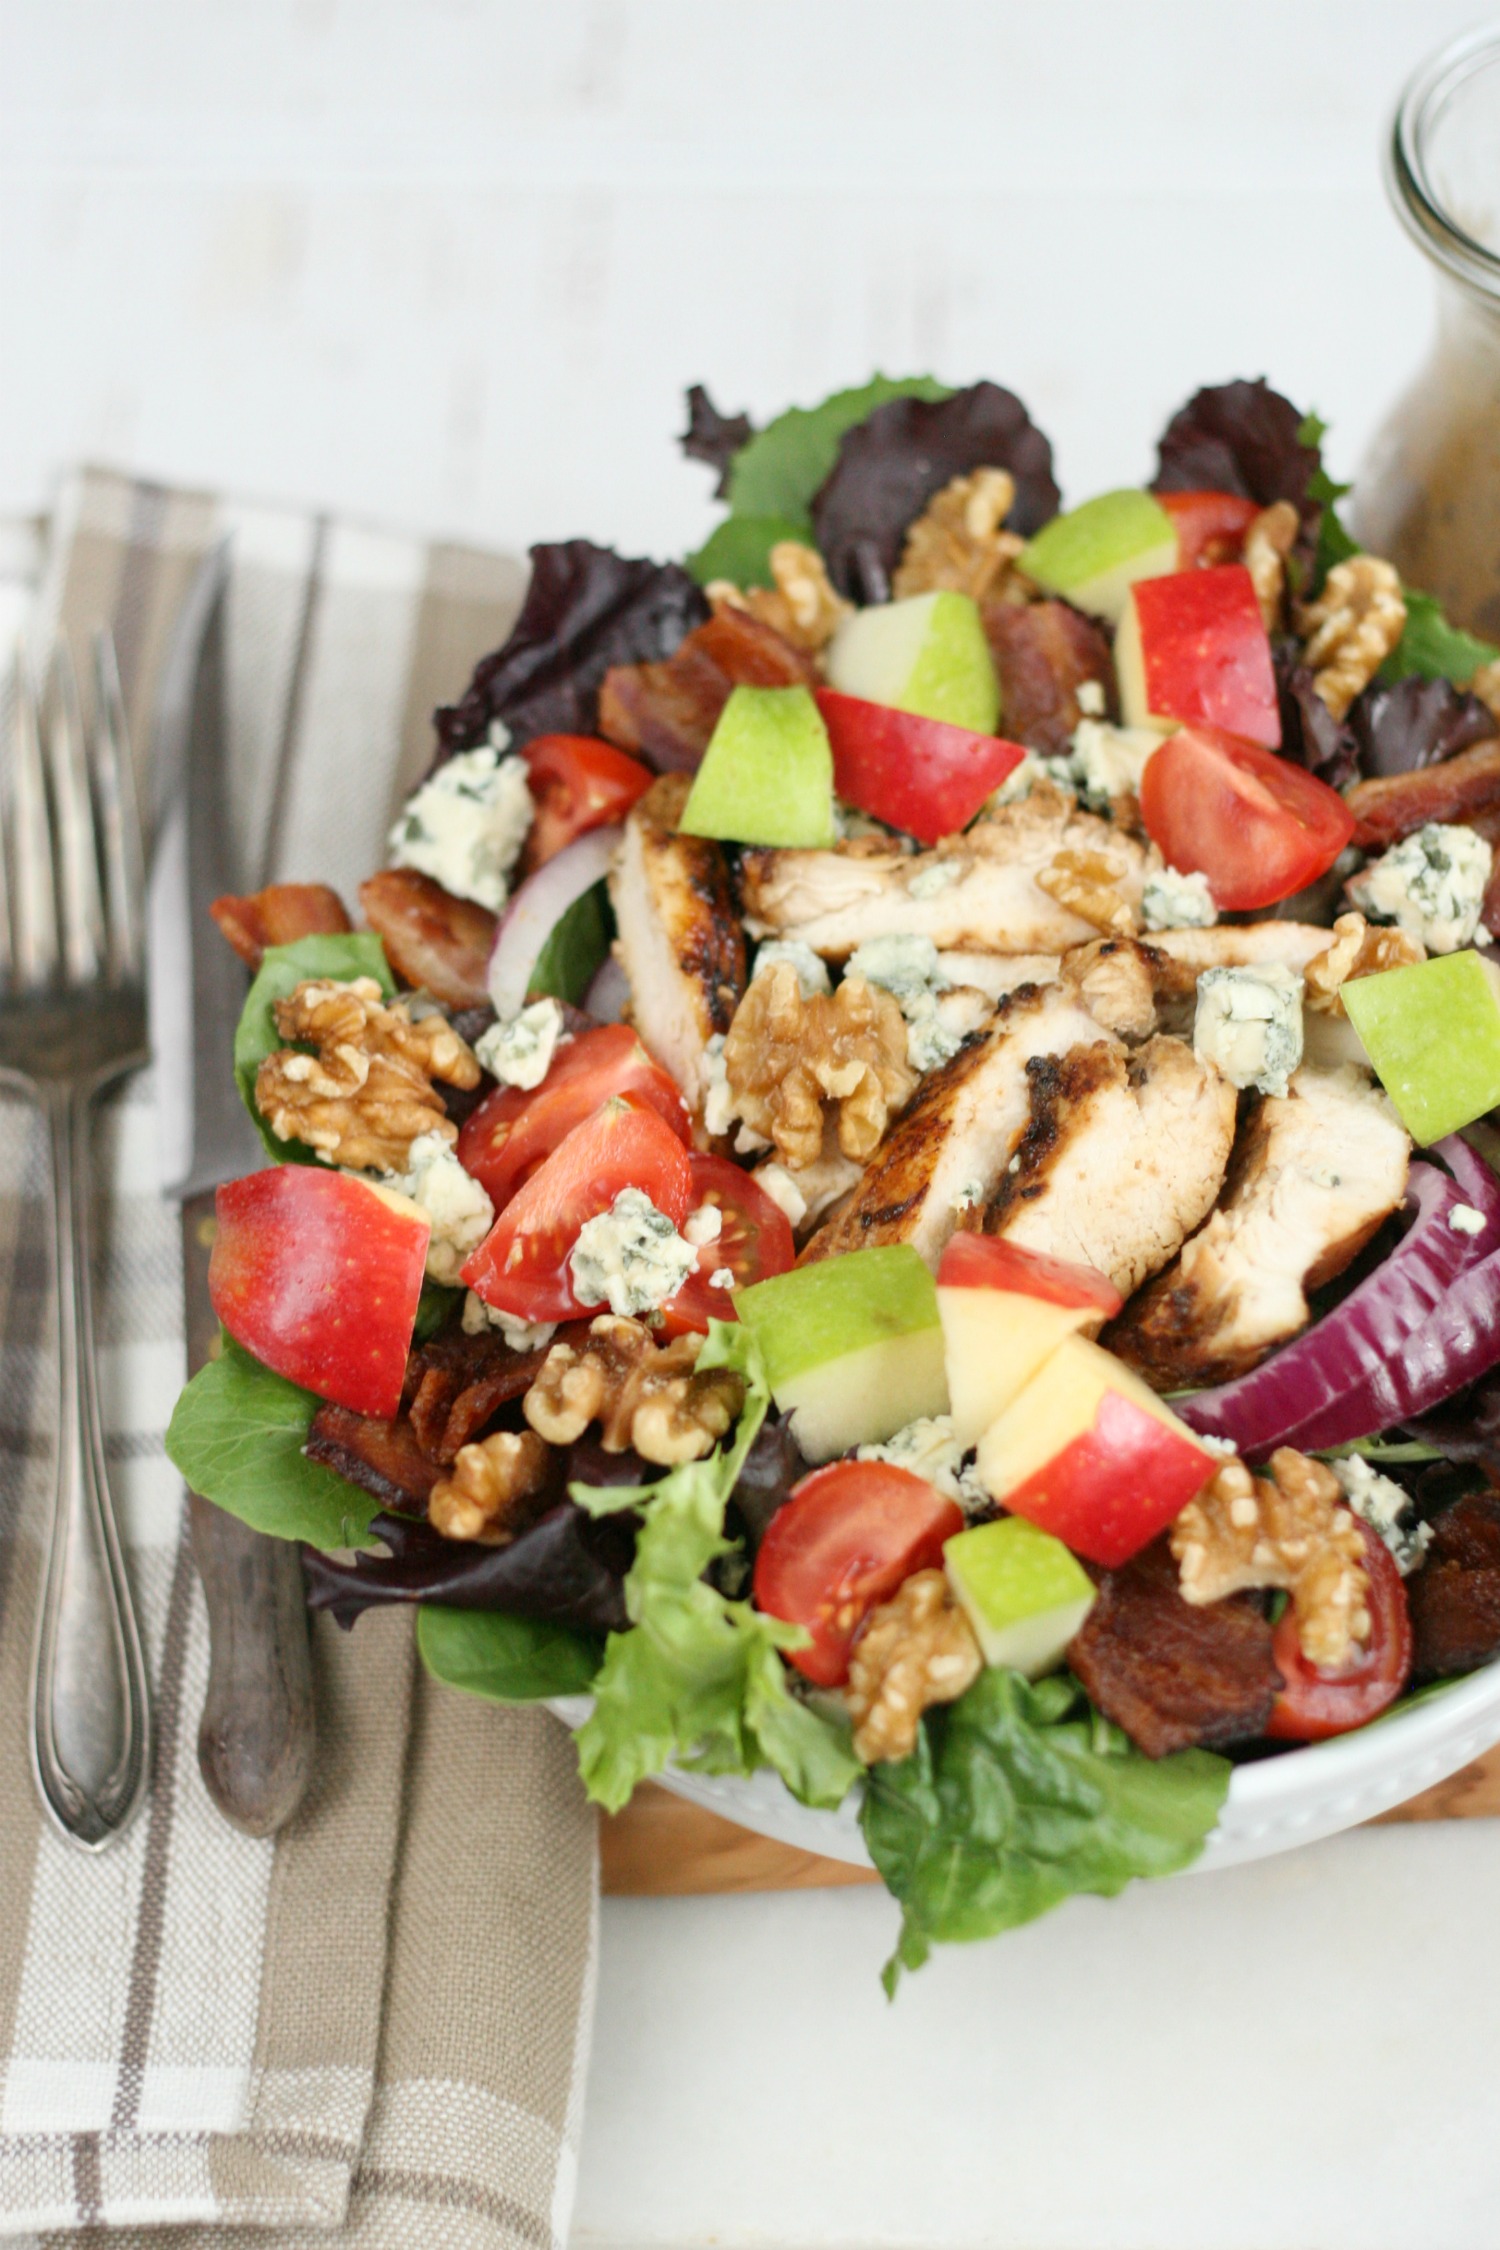 Harvest chicken salad with mixed baby greens, slices of red onions, walnuts, chunks of blue cheese, red and green apple chunks.